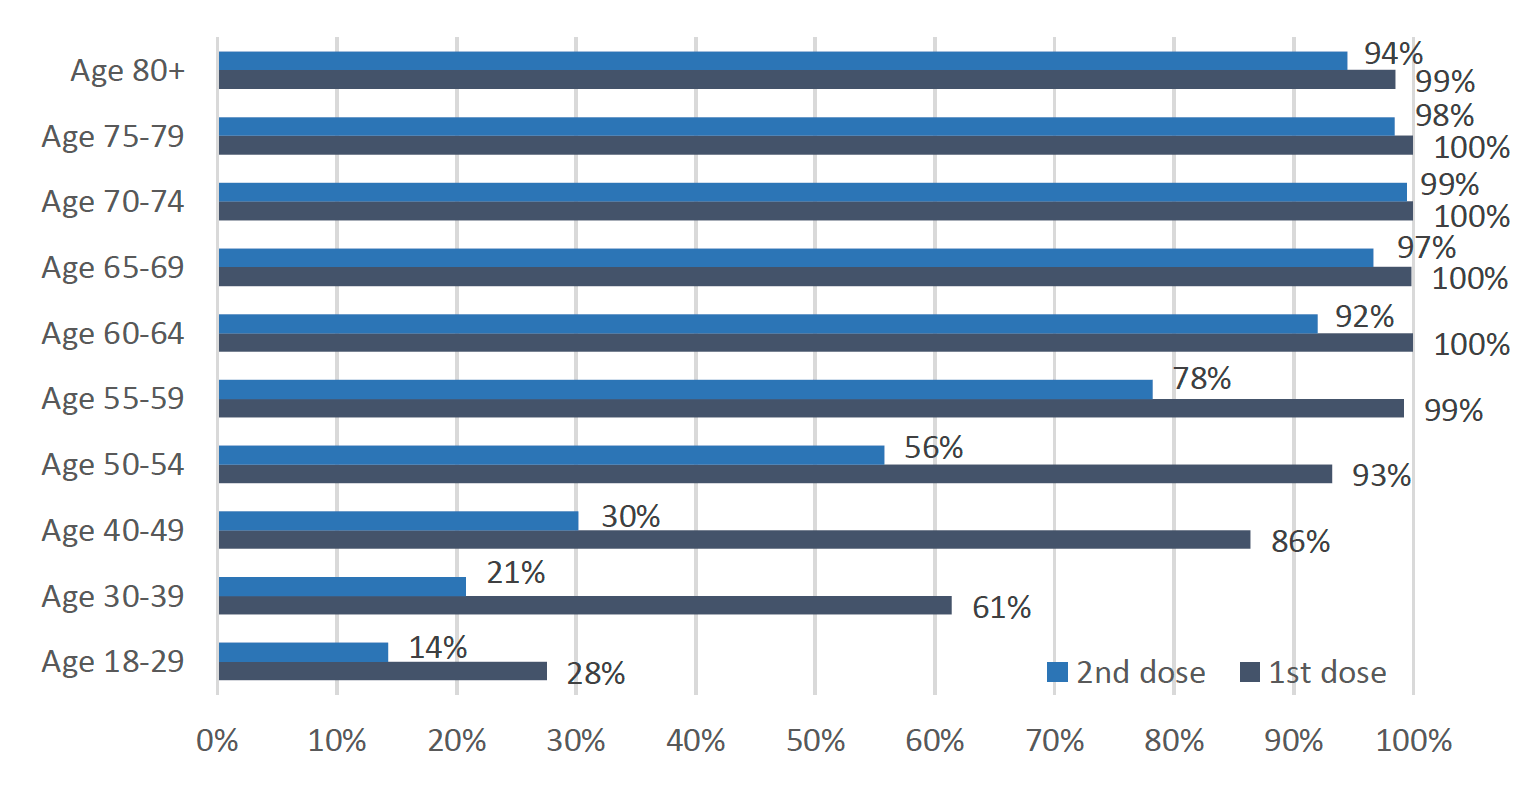 This bar chart shows the percentage of people that have received their first and second dose of the Covid vaccine so far, for 10 age groups. The six groups aged over 55 have more than 98% of people vaccinated with the first dose. The five groups aged 60 and over have more than 92% of people vaccinated with the second dose. Younger age groups have lower percentages vaccinated, with 28% of 18 to 29 year olds having received the first dose and only 14% having received the second dose.